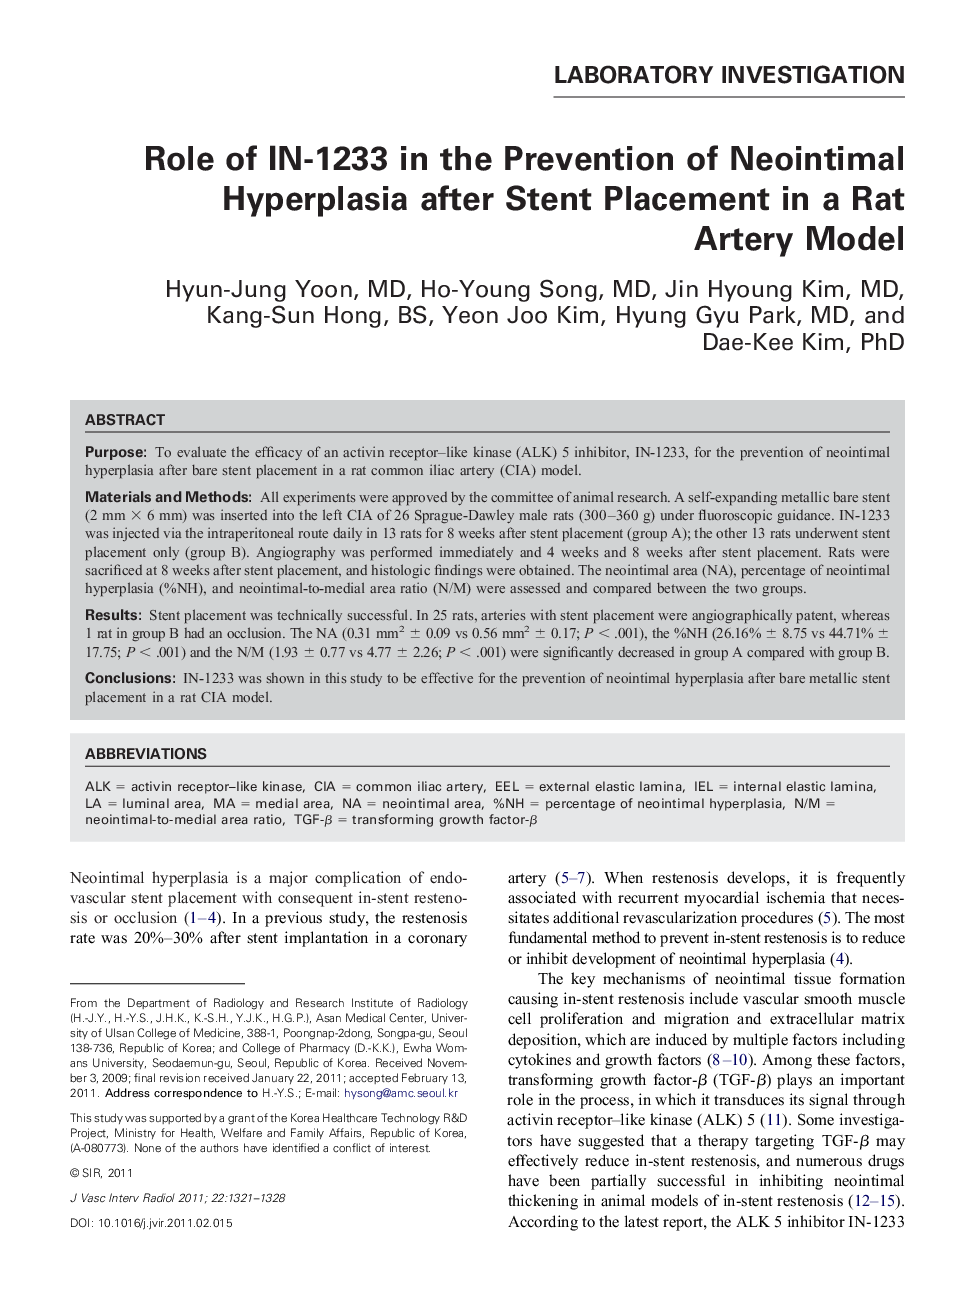 Role of IN-1233 in the Prevention of Neointimal Hyperplasia after Stent Placement in a Rat Artery Model